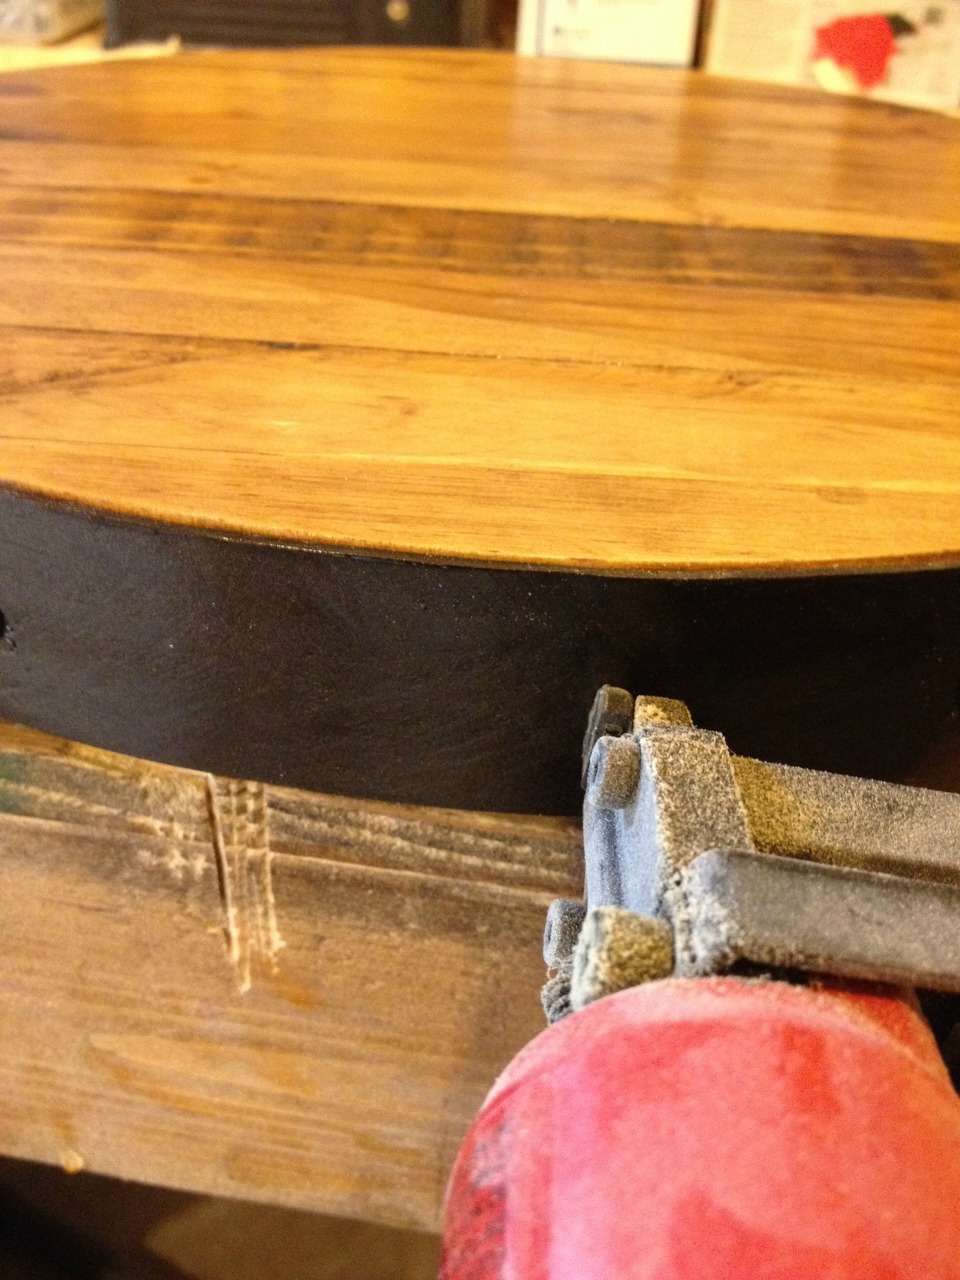 Using a stapler to attach fake metal band around wooden lazy susan